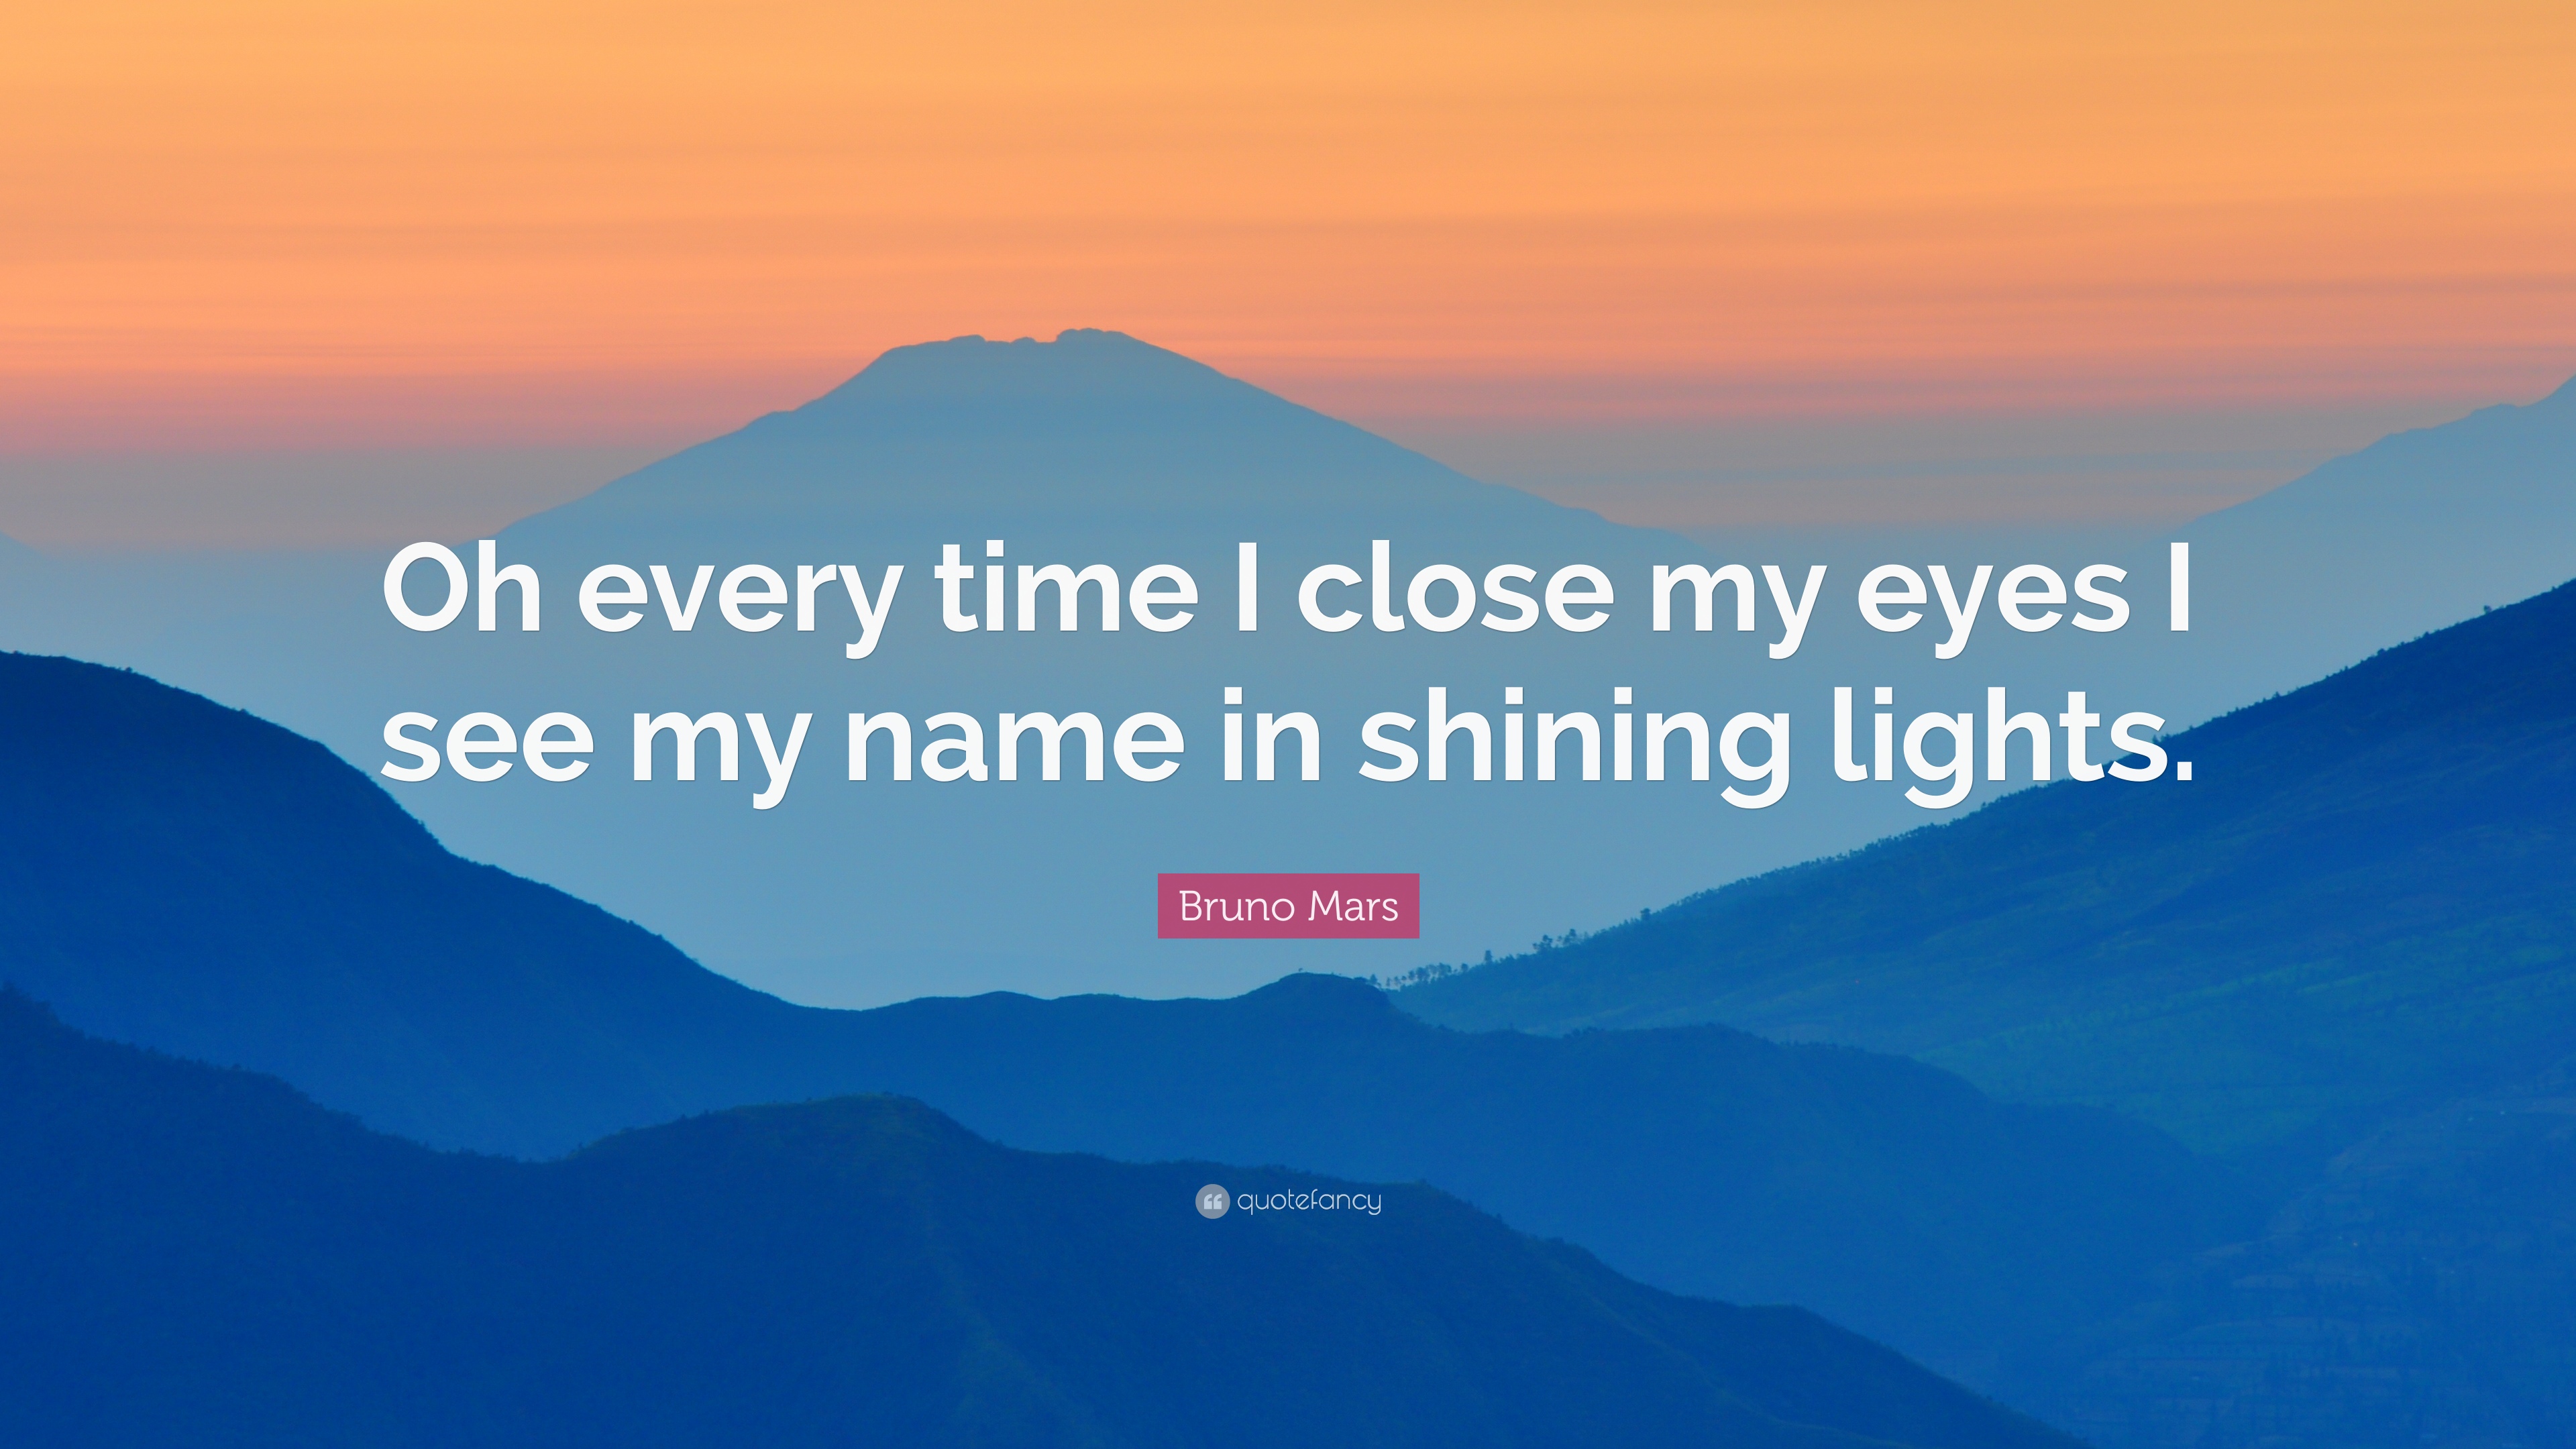 Bruno Mars Quote: “Oh every time I close my eyes I see my